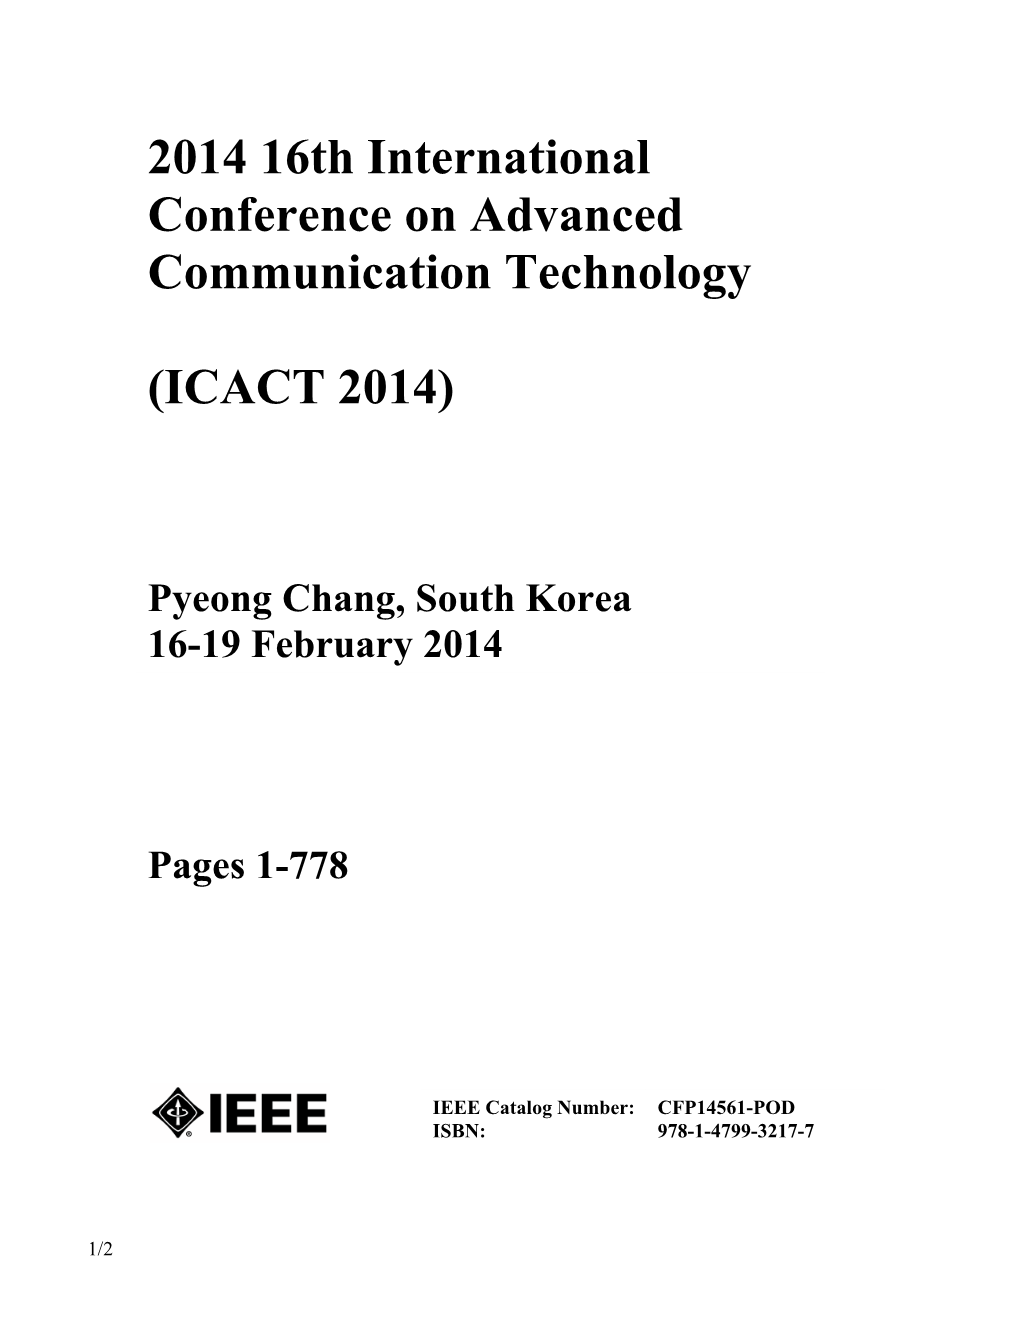 2014 16Th International Conference on Advanced Communication Technology (ICACT 2014)